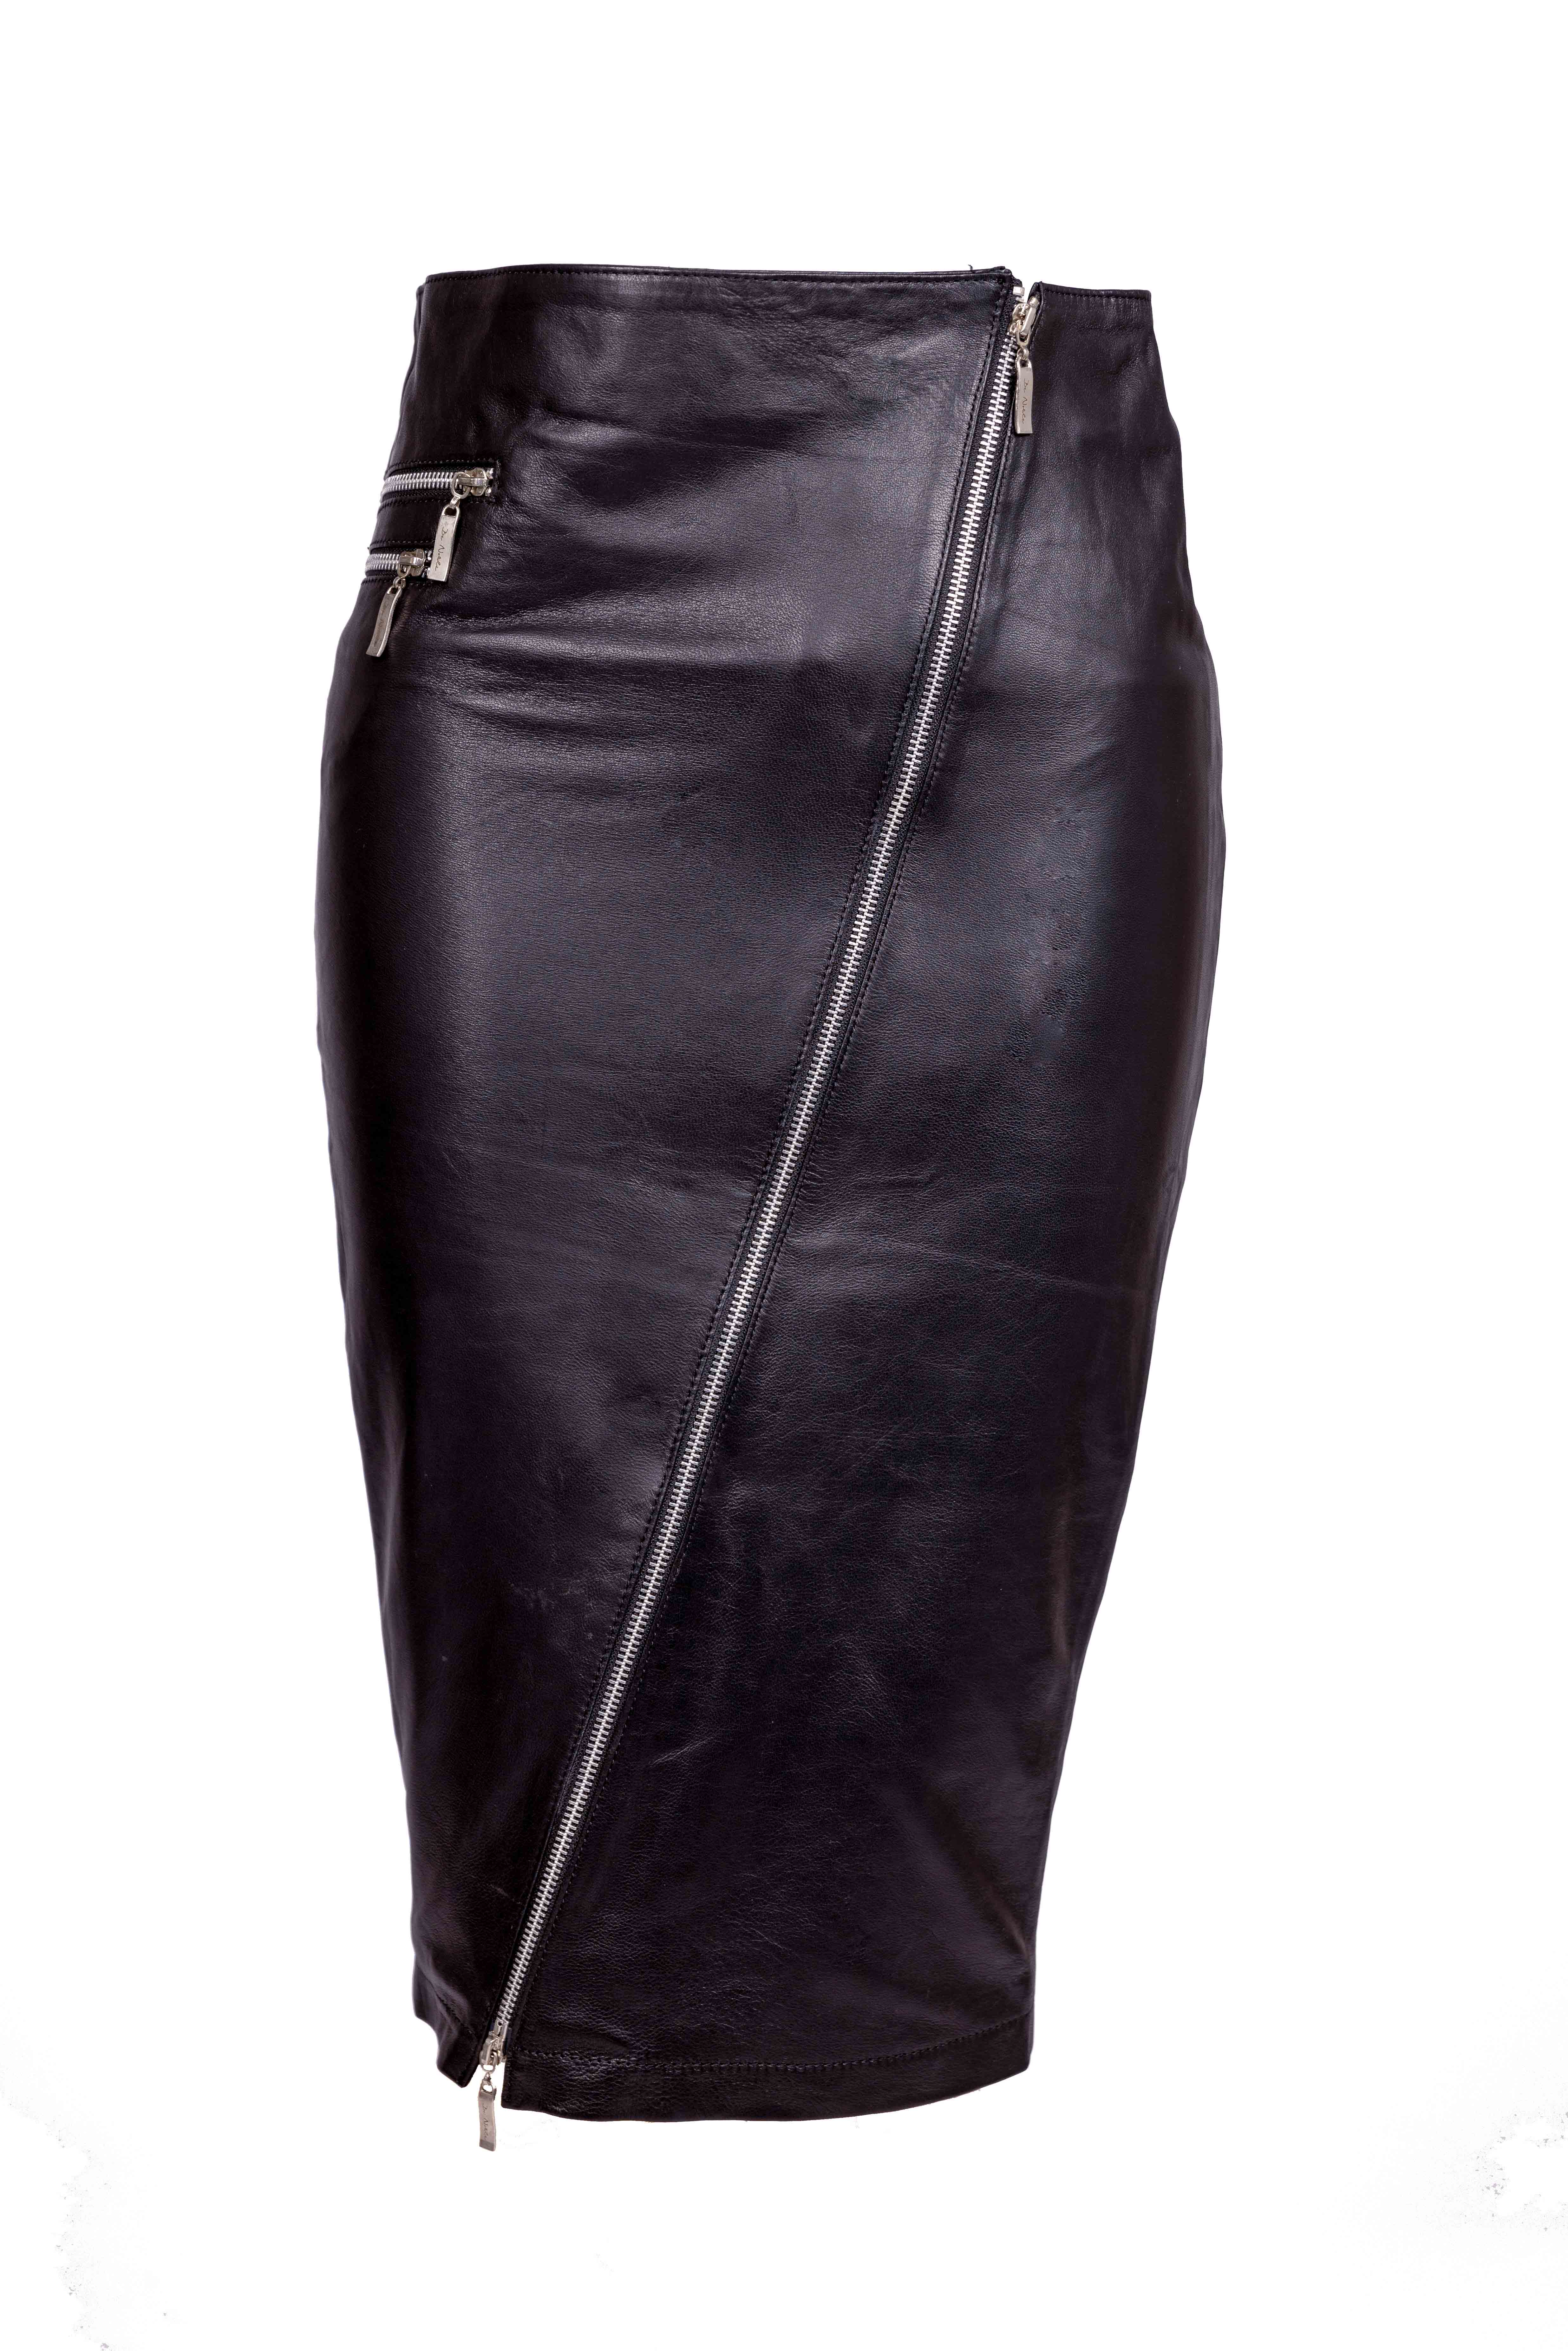 Leather skirt High waisted pencil skirt in GENUINE leather with zippers